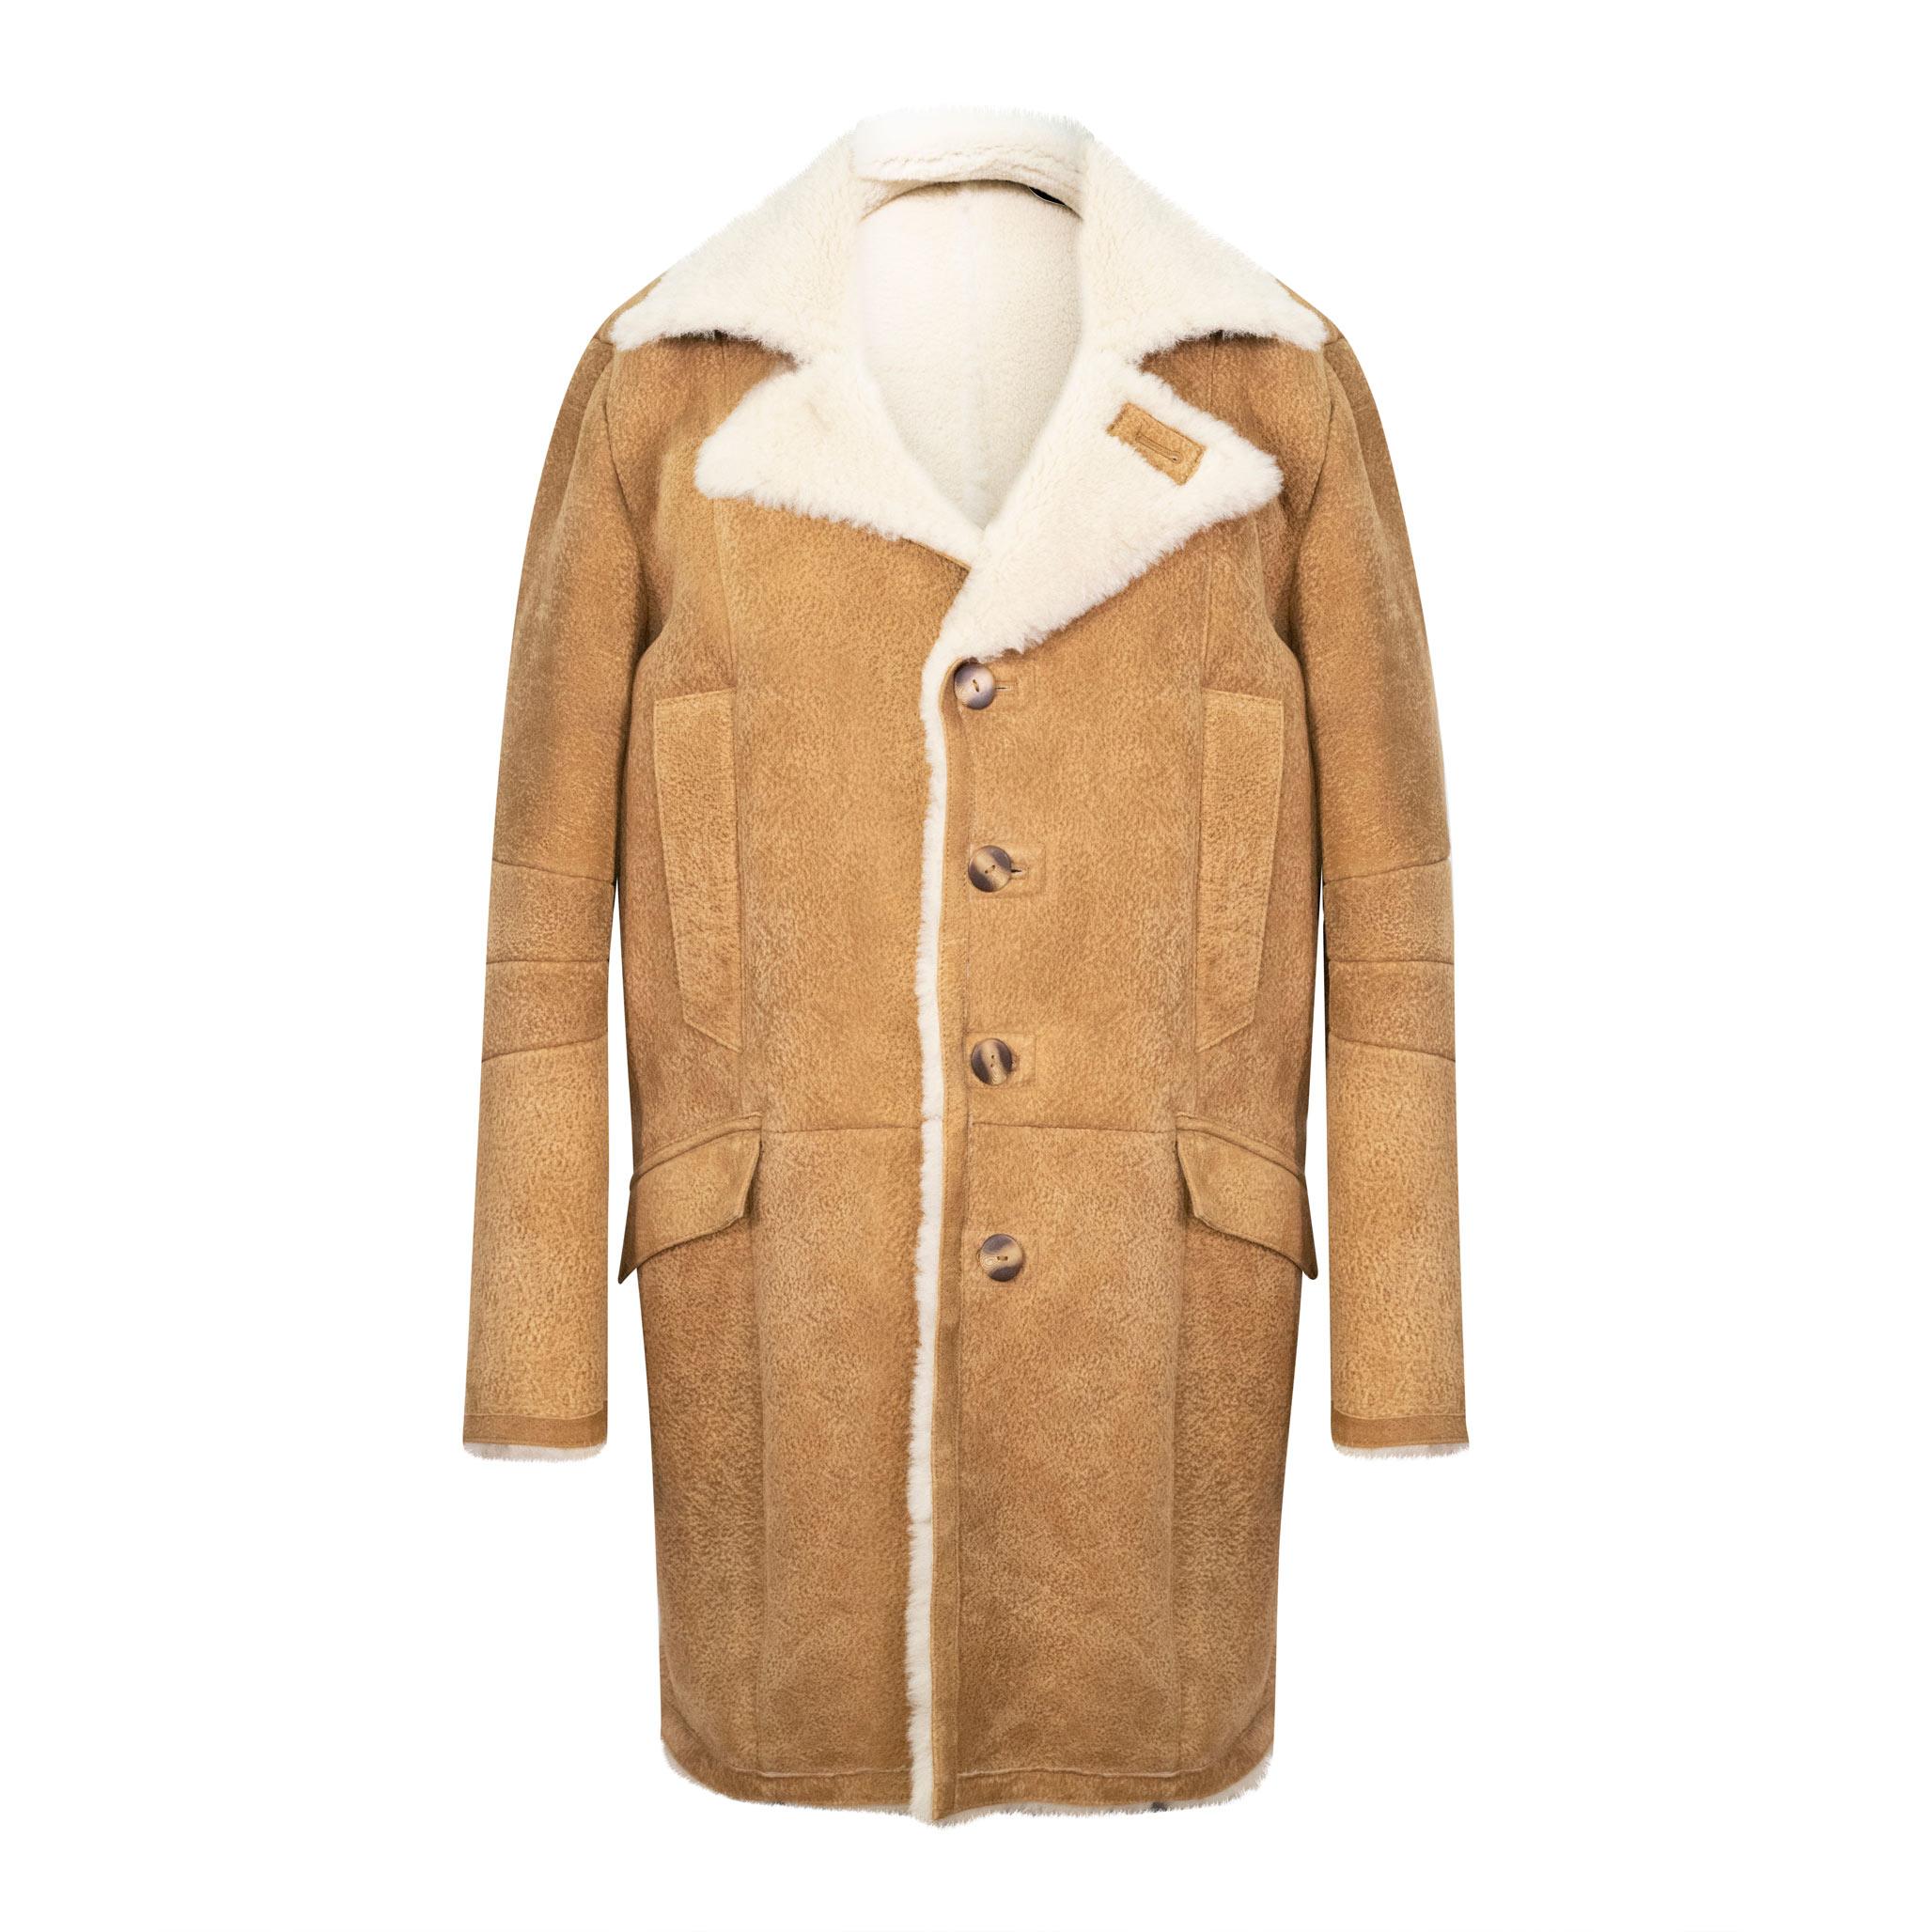 A thick sheepskin coat in tan with cream fur. Long length, with front buttoned fastening. 4 external hand warmer pockets.